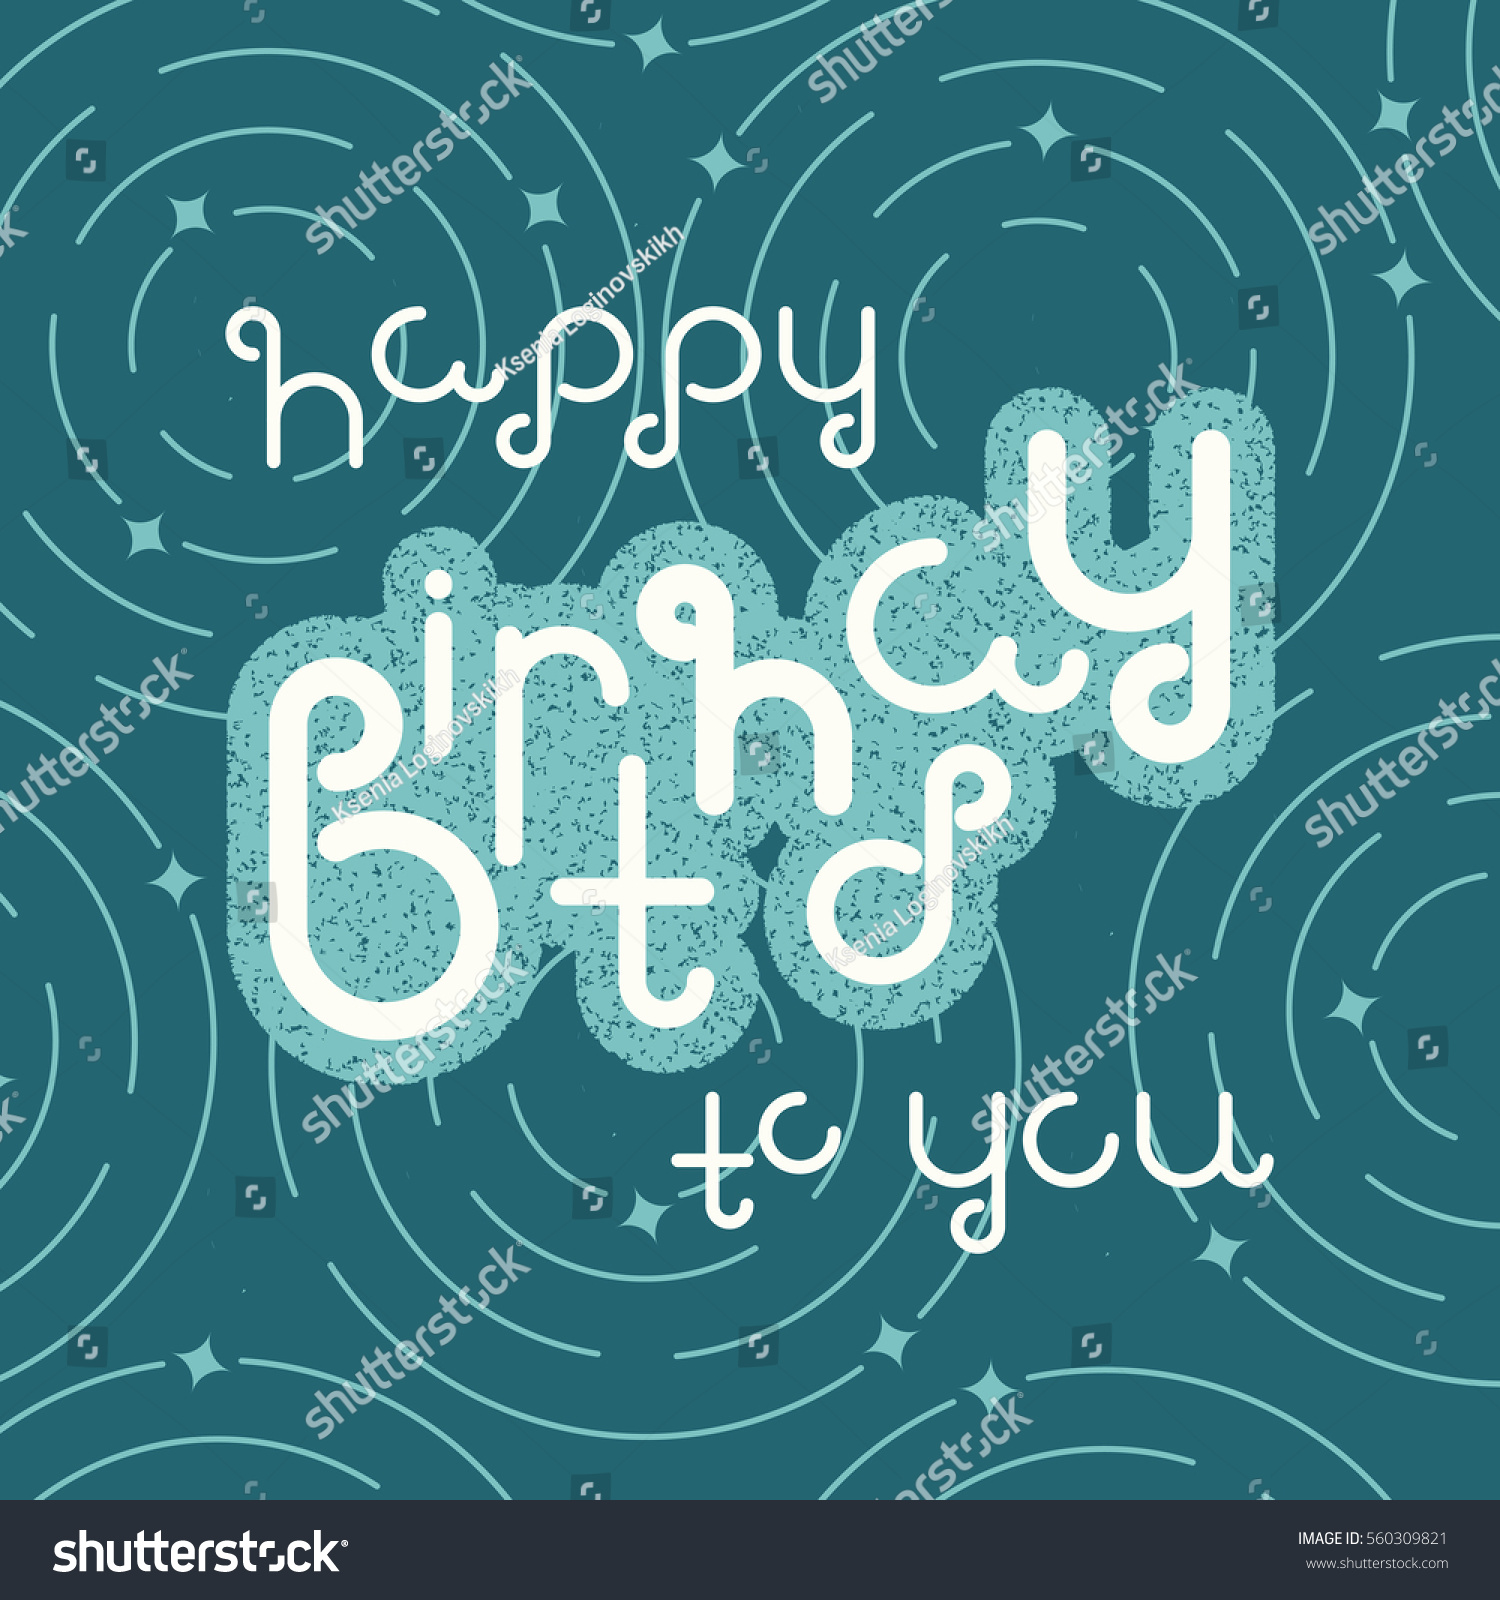 Vector Linear Hipster Font Happy Birthday Stock Vector (Royalty Free ...